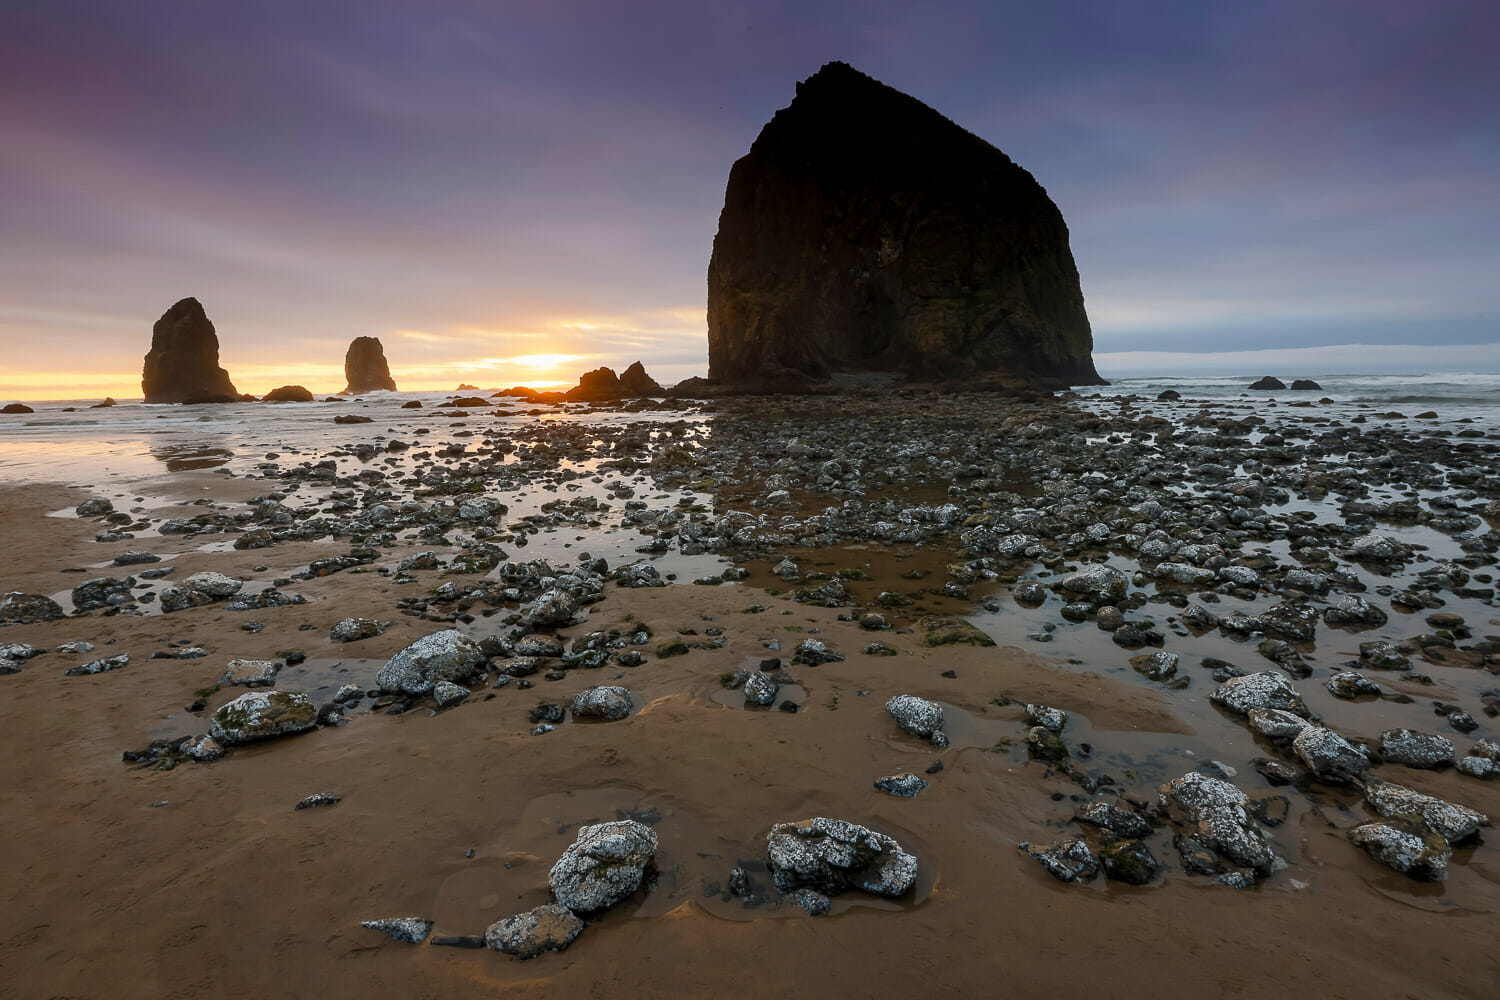 Cannon beach at sunset with rocks scattered across the sand